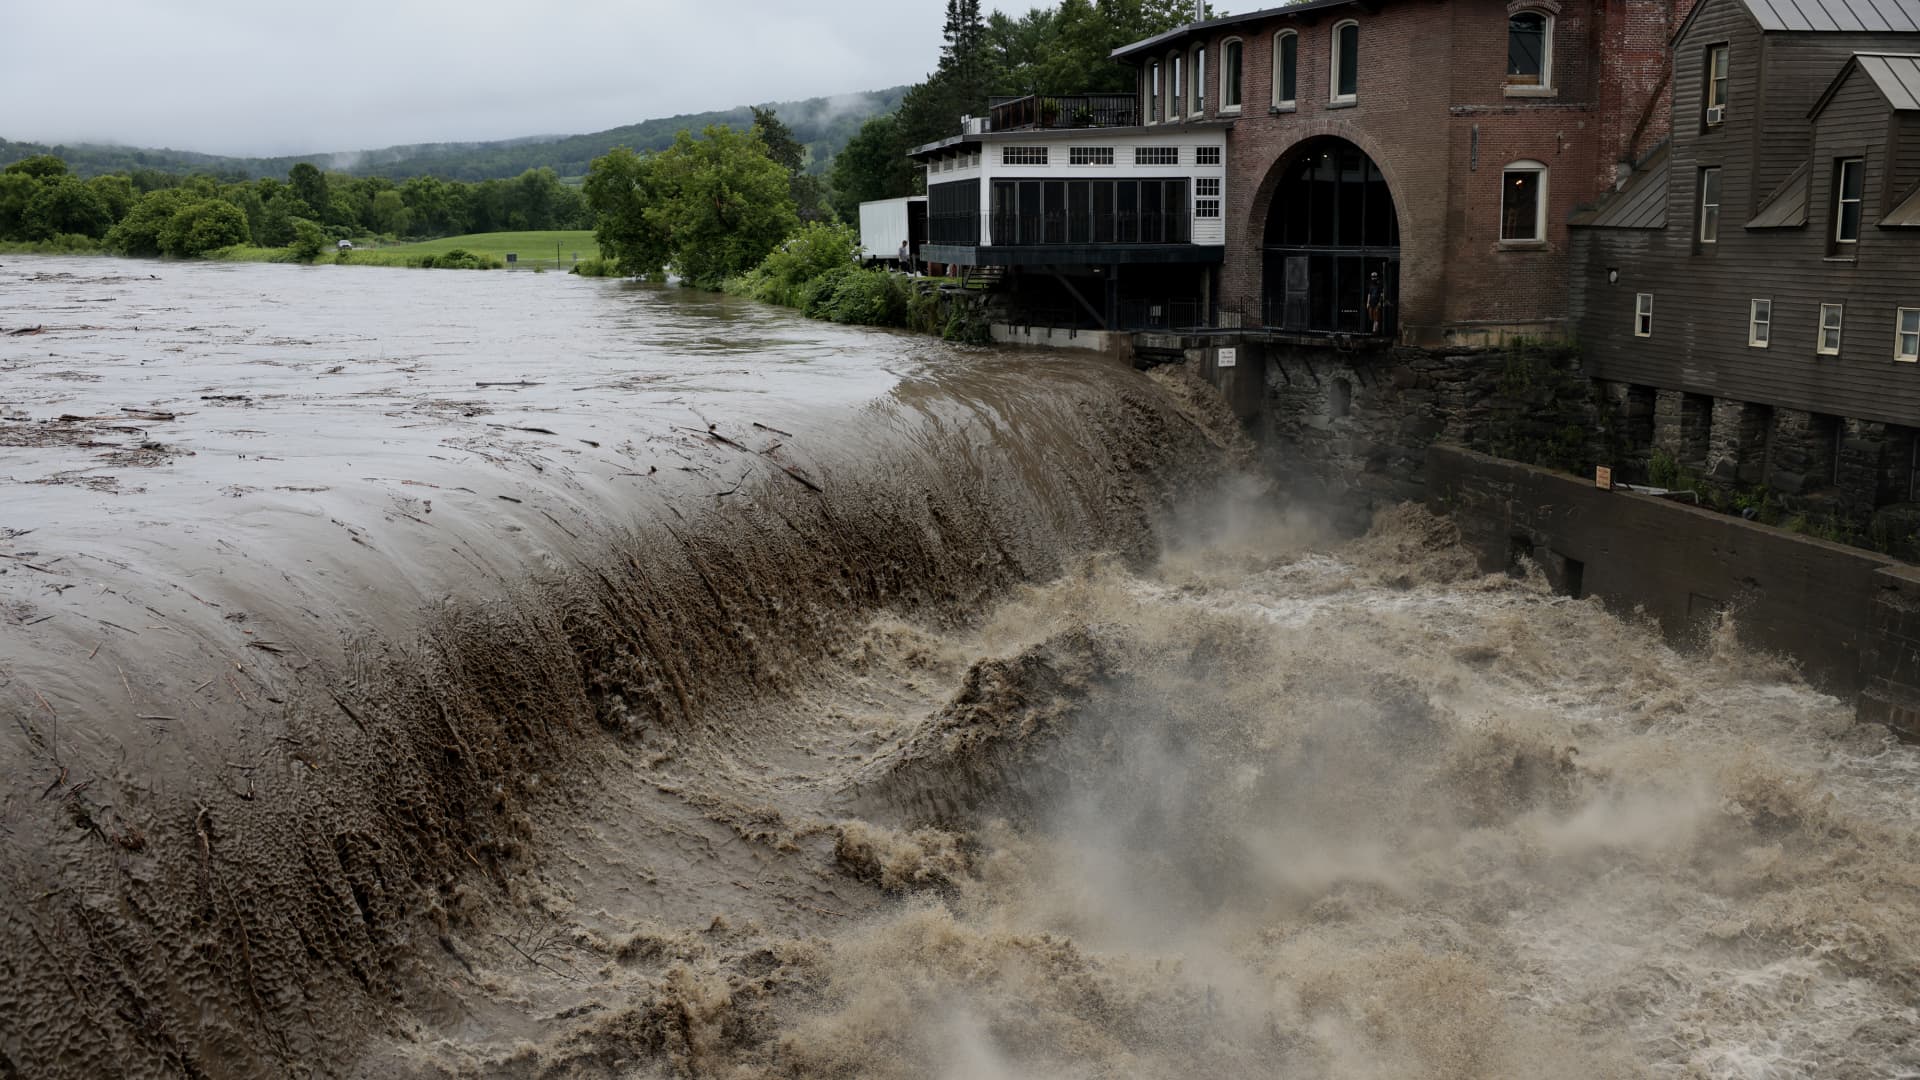 See images of the floods plaguing New York and New England